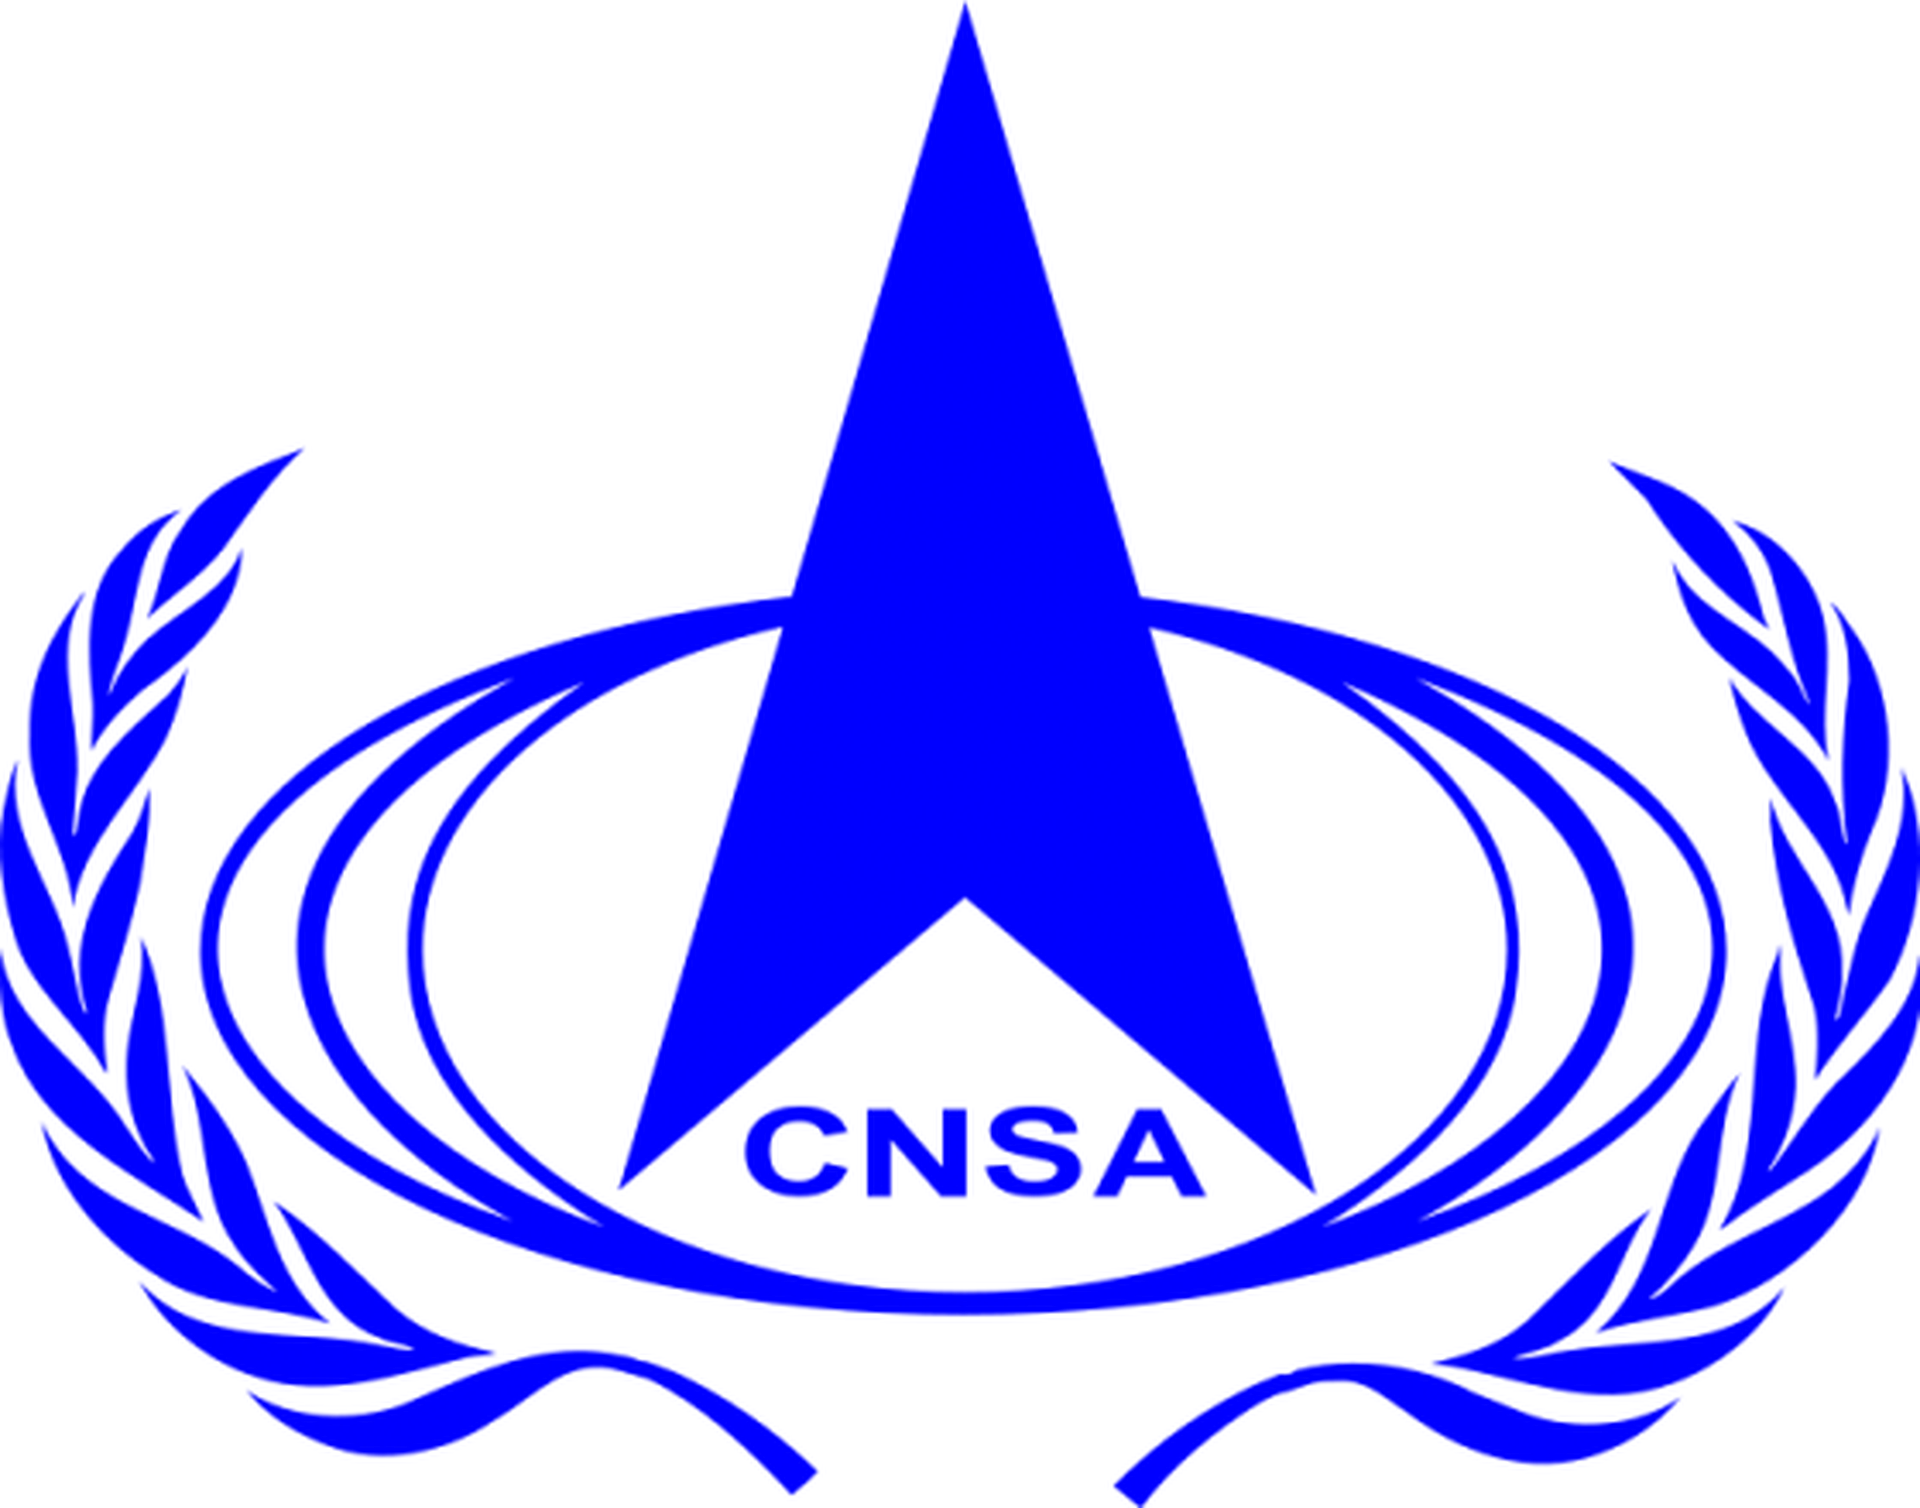 China National Space Administration's logo